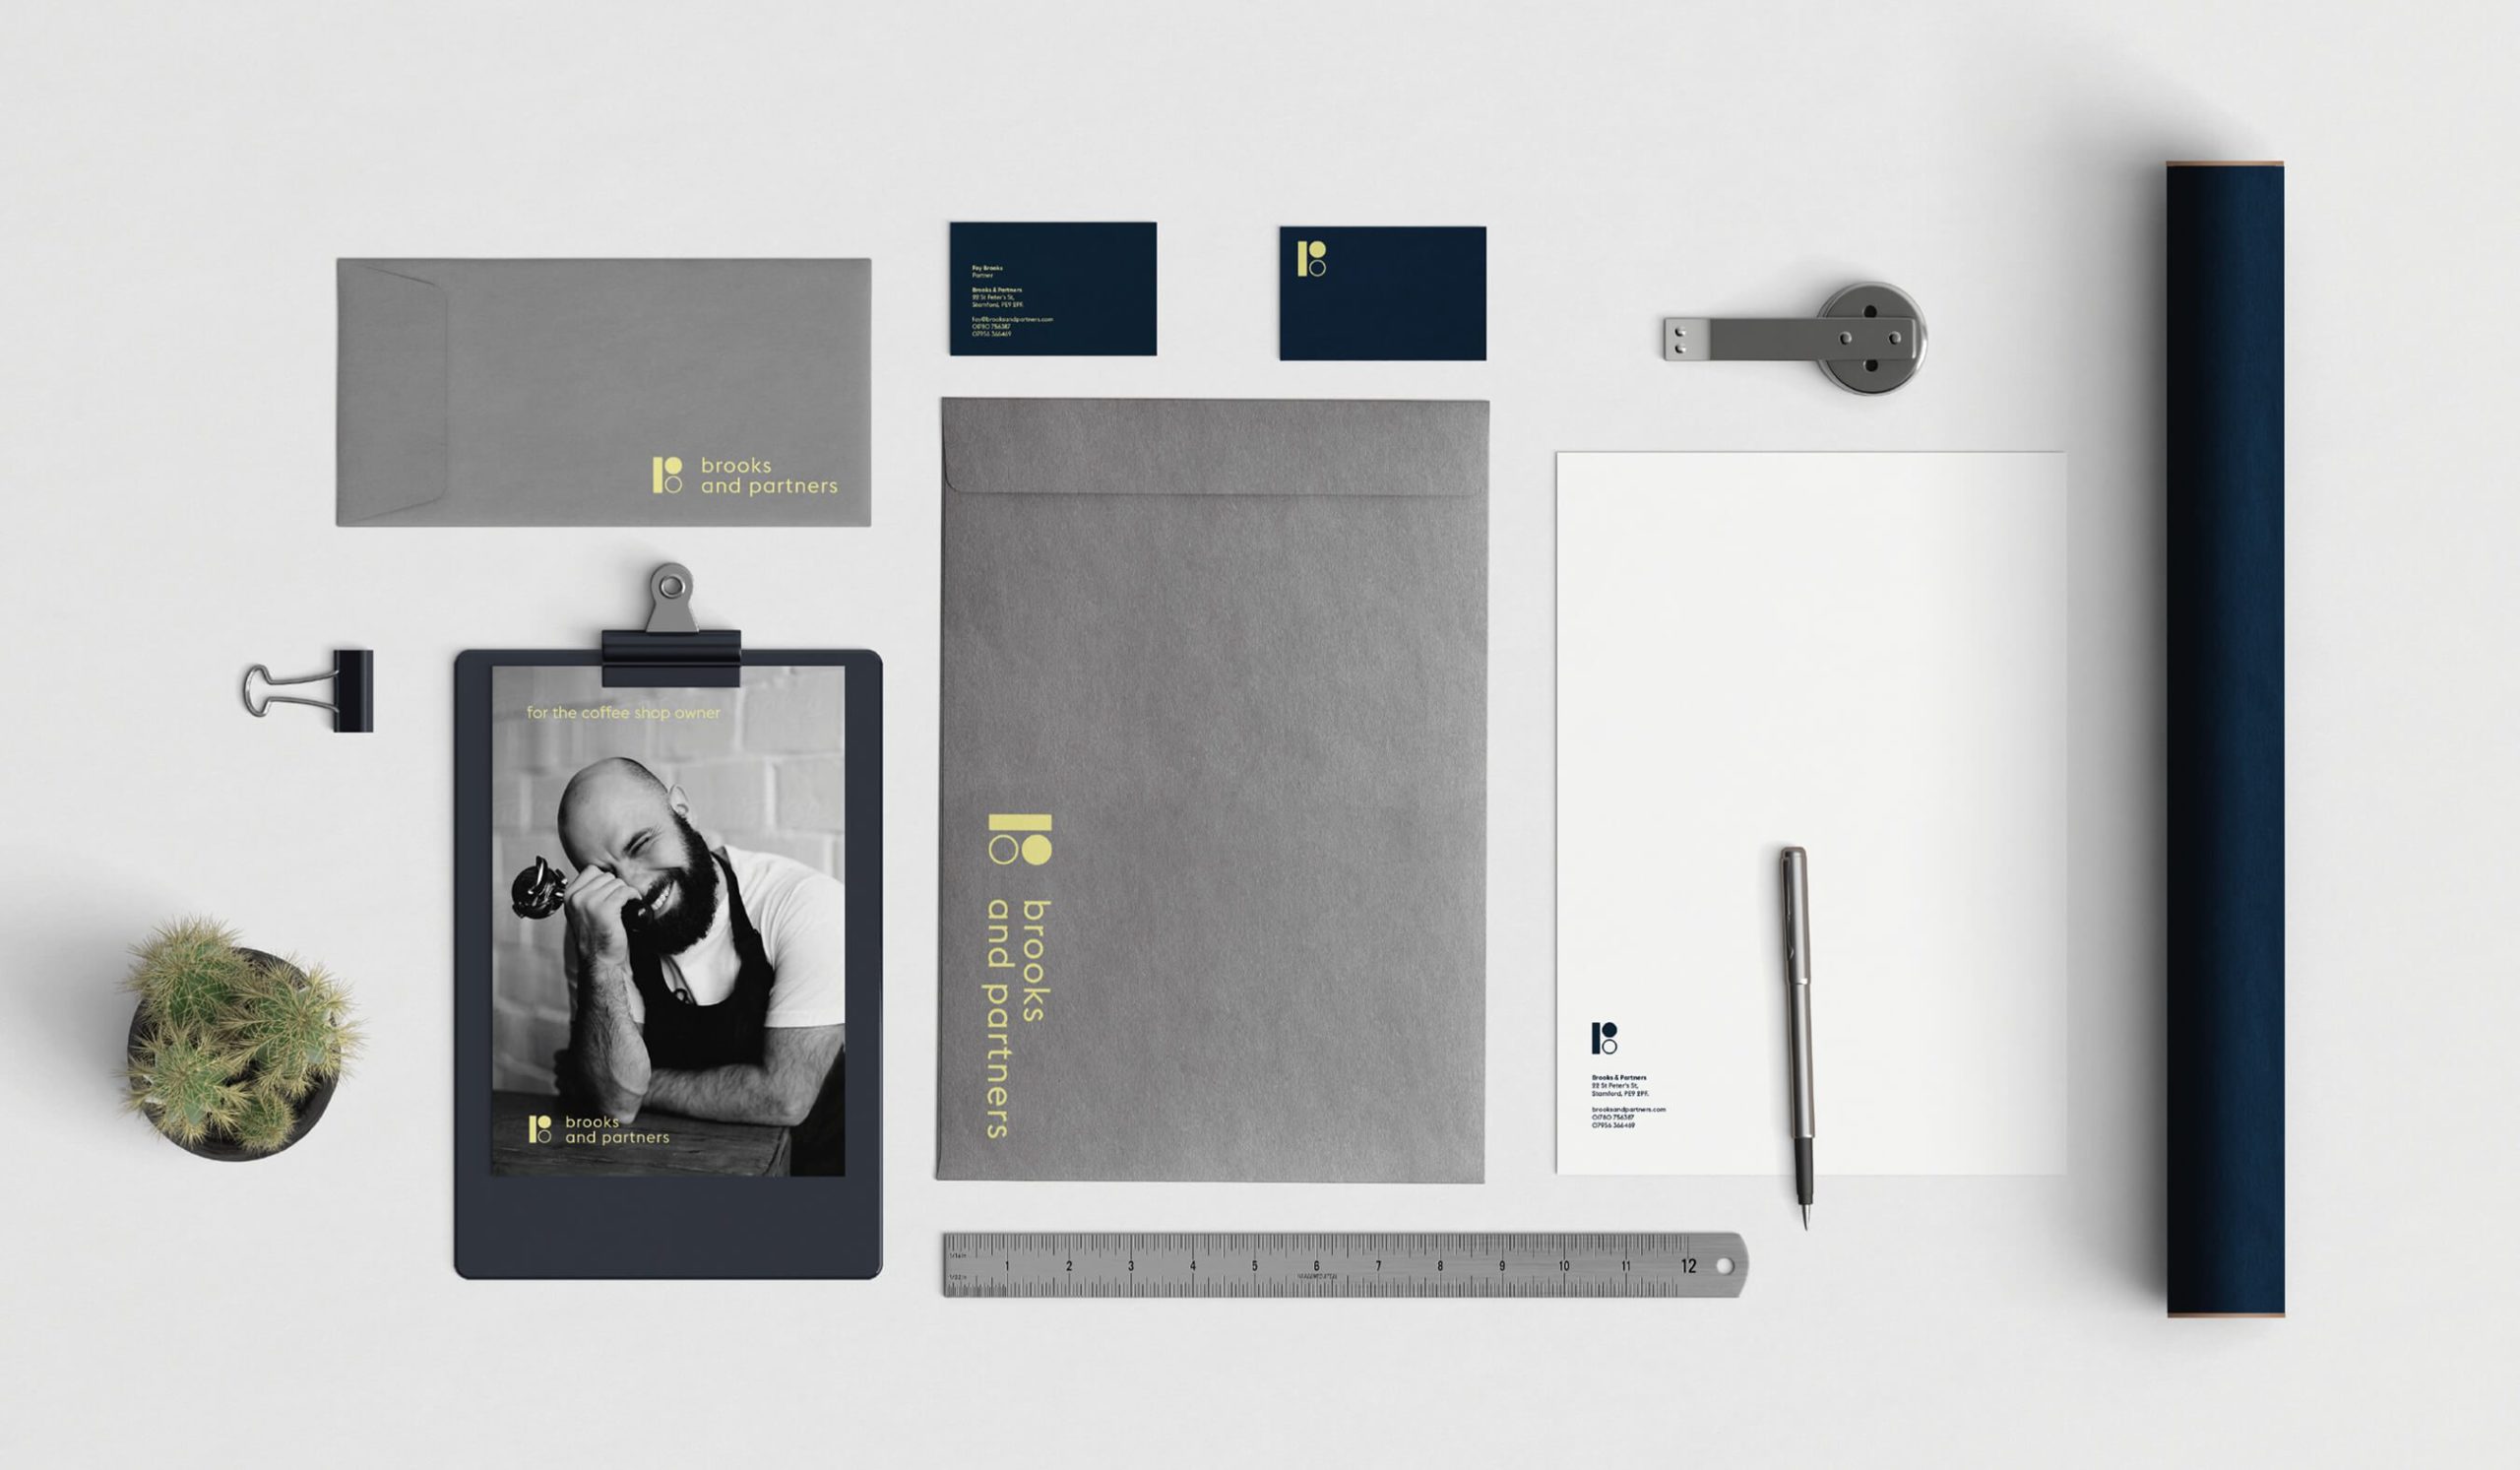 Accountant branding stationery for Brooks & partners